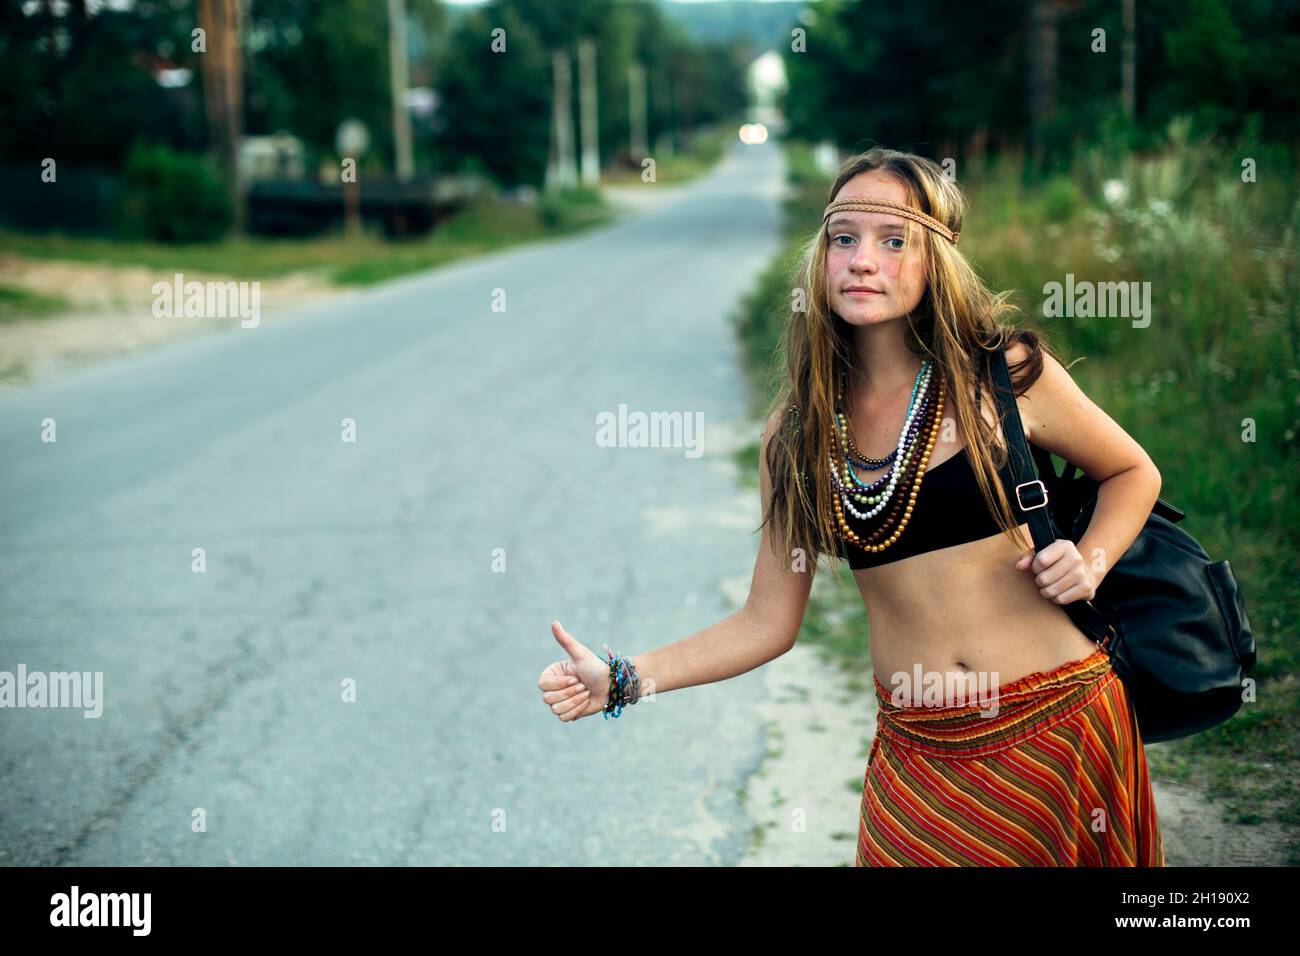 Hippie girl voting near the country road. Hitchhiking. Stock Photo